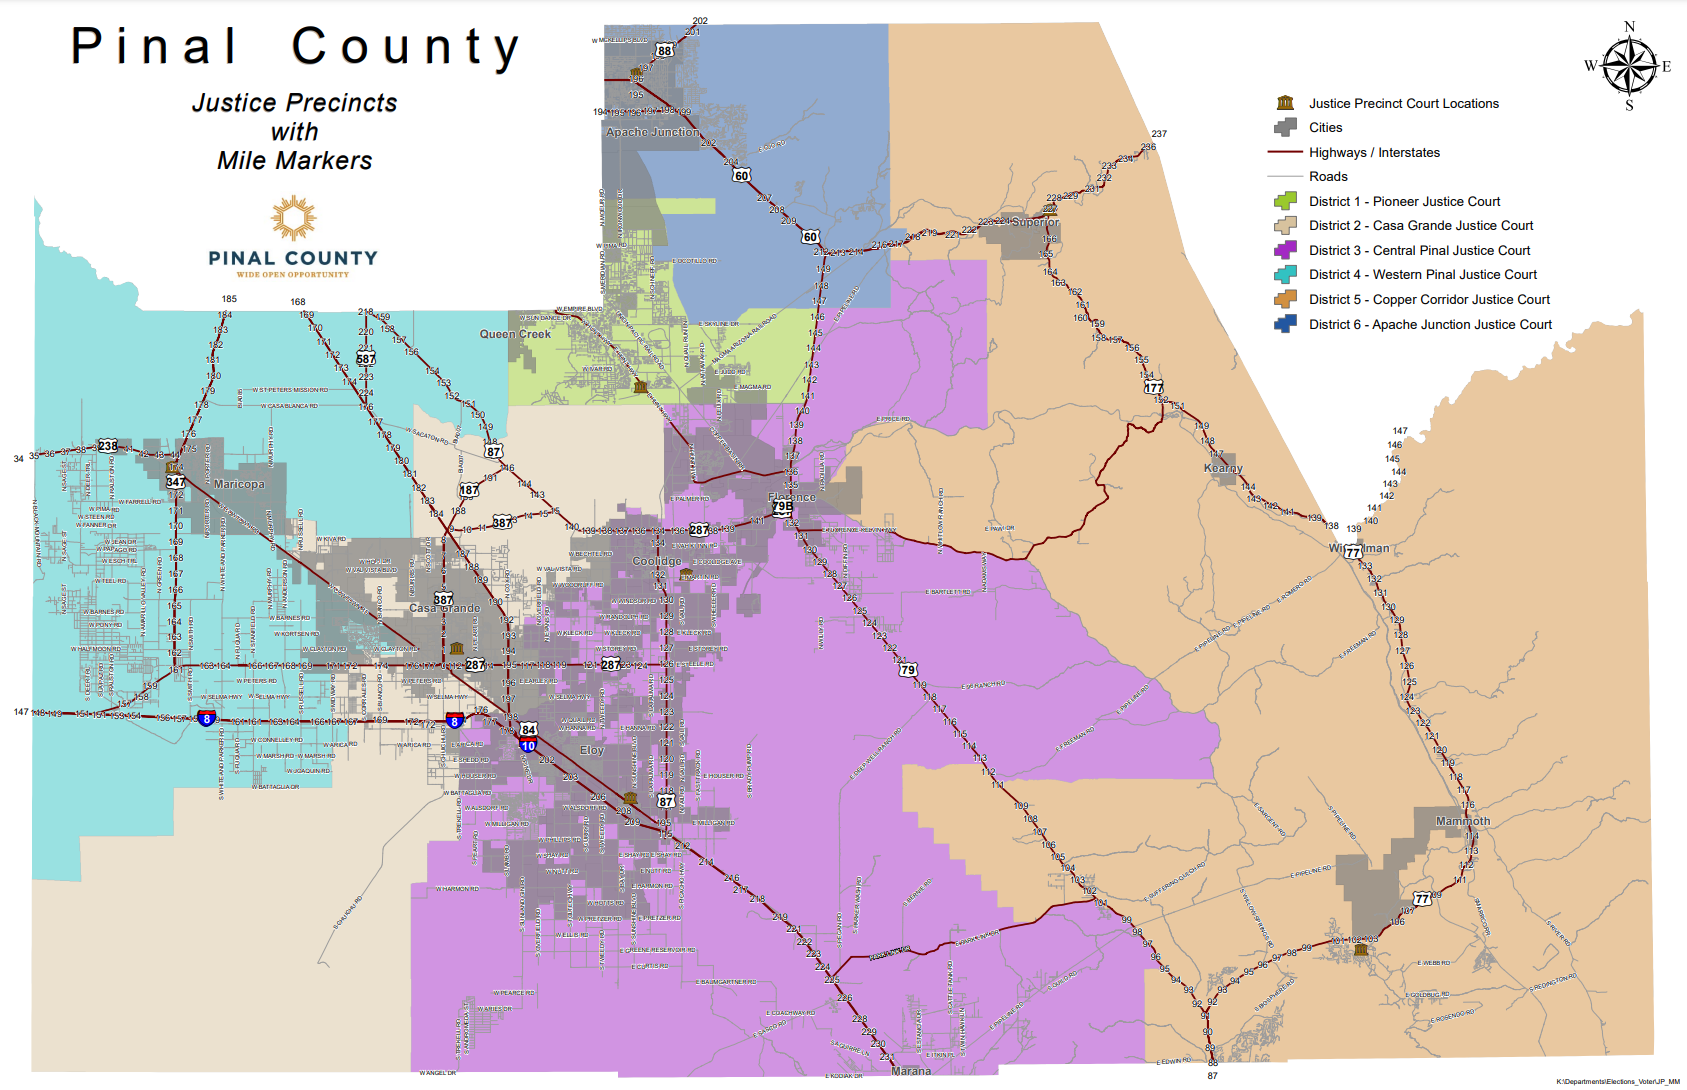 Board Of Supervisors Approve New Supervisor District And Justice Precinct Maps Supervisor 0728